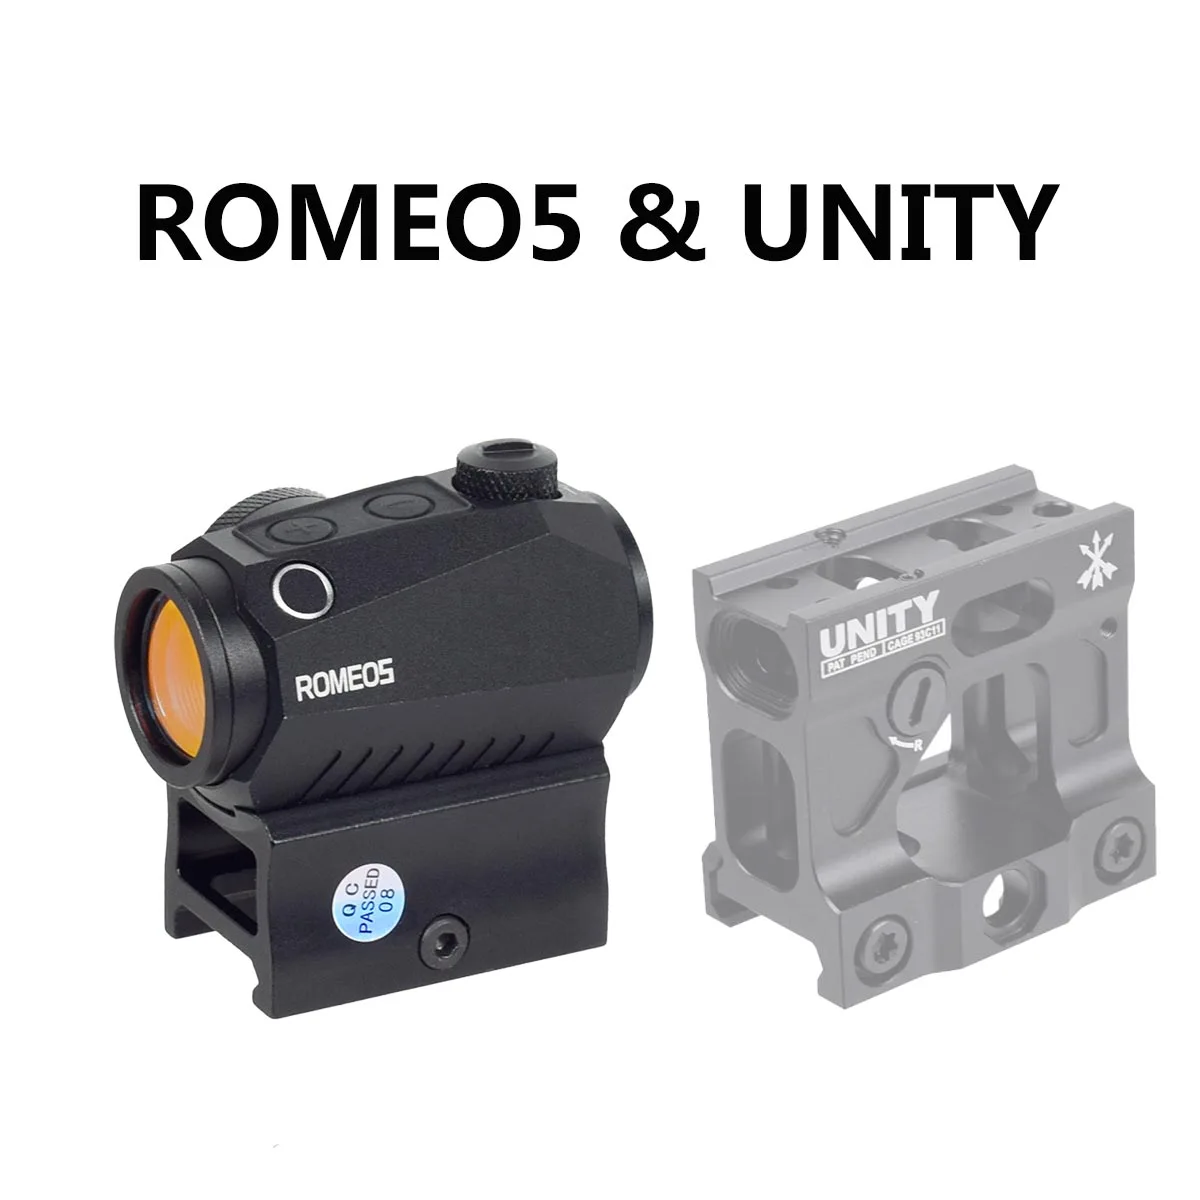 

Tactical ROMEO5 Red Dot Sight Holographic Reflex Compact 2 MOA Riflescope Hunting Scope With UNITY Fast Riser Mount